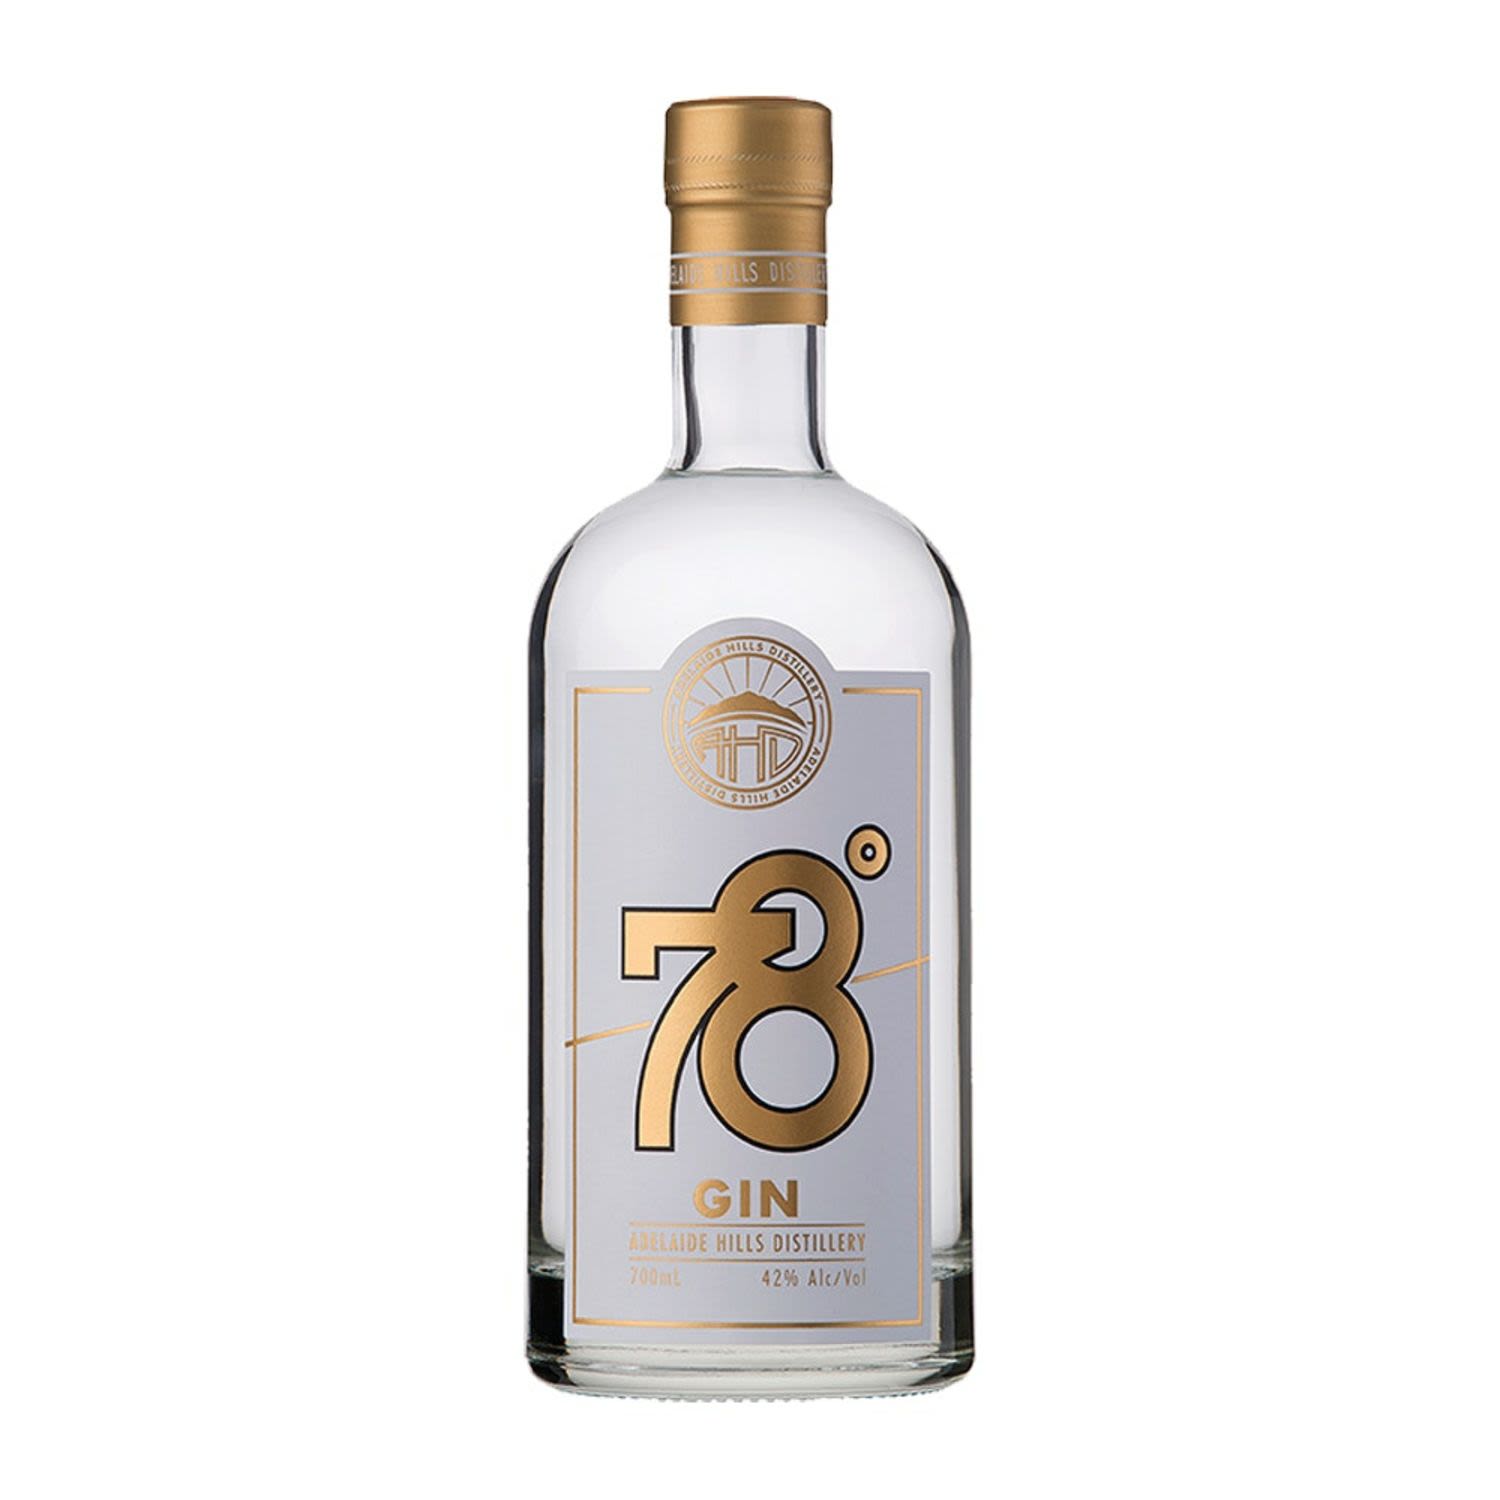 Produced in small batches utilising grape spirit, the 78 Degrees Gin is vapour distilled using our unique column and basket distillation method, to retain delicate flavours and aromas.<br /> <br />Alcohol Volume: 42.00%<br /><br />Pack Format: Bottle<br /><br />Standard Drinks: 23</br /><br />Pack Type: Bottle<br /><br />Country of Origin: Australia<br />